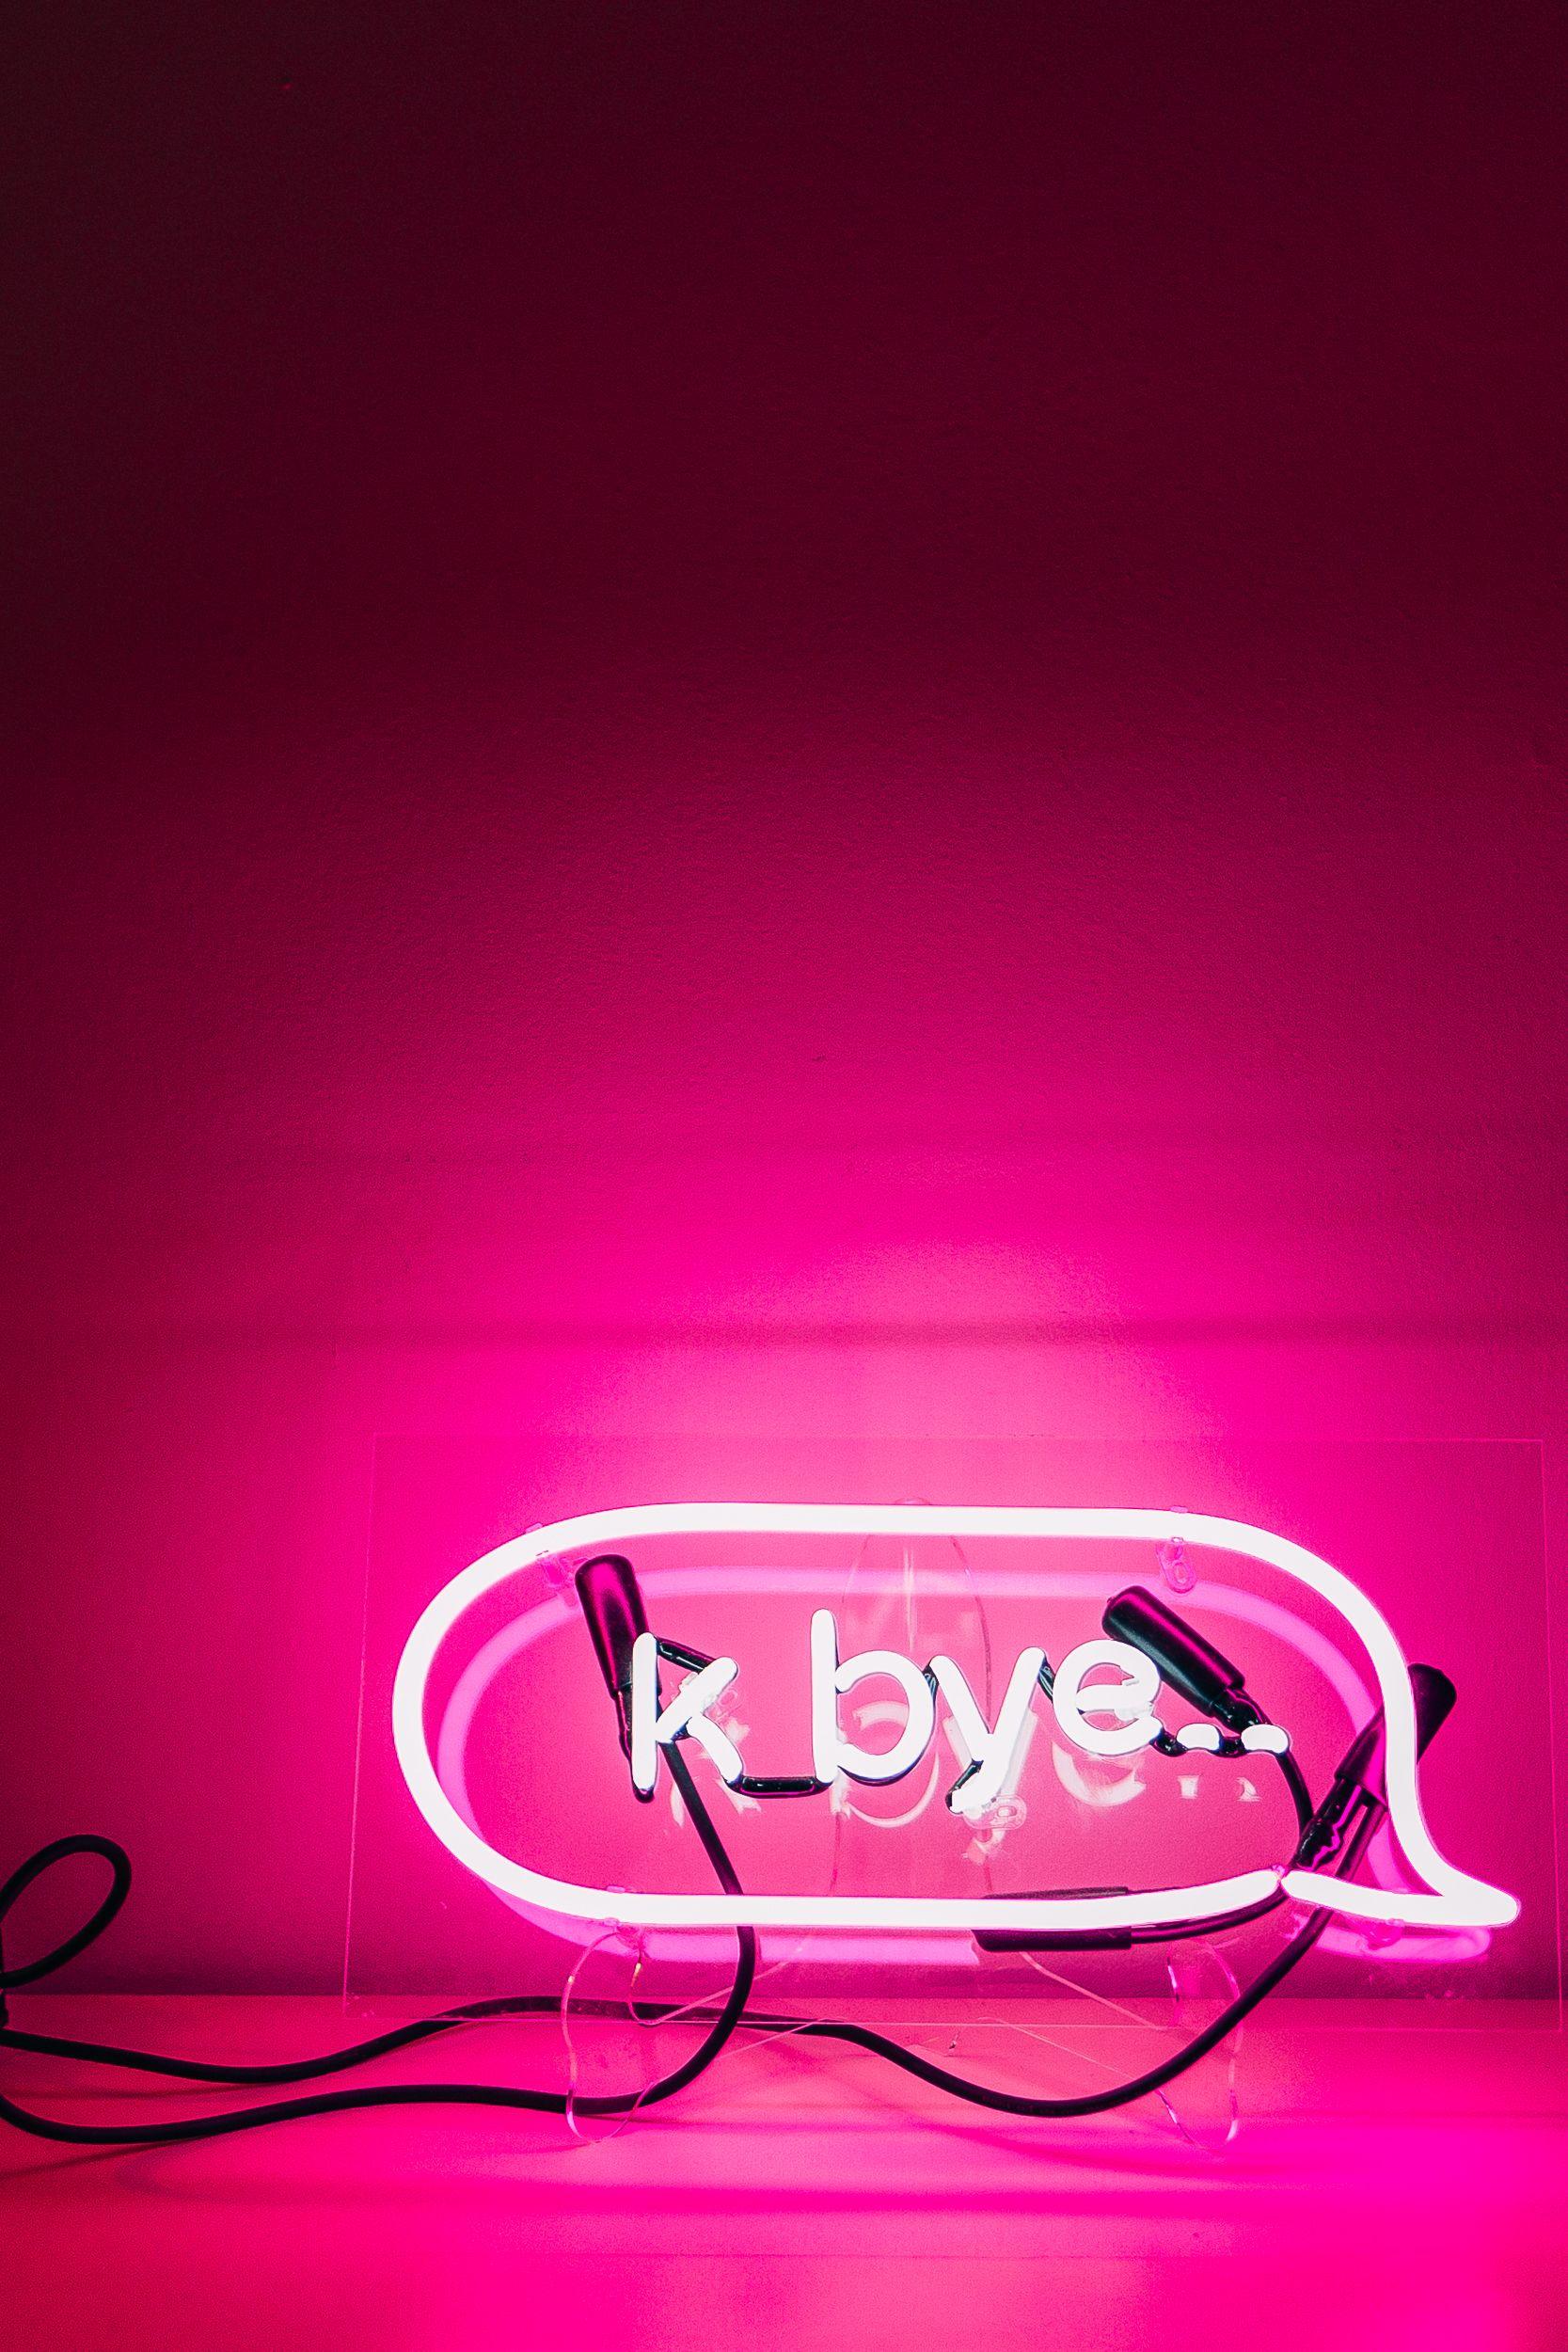 neon sign aesthetic wallpapers wallpaper cave on neon sign aesthetic wallpapers